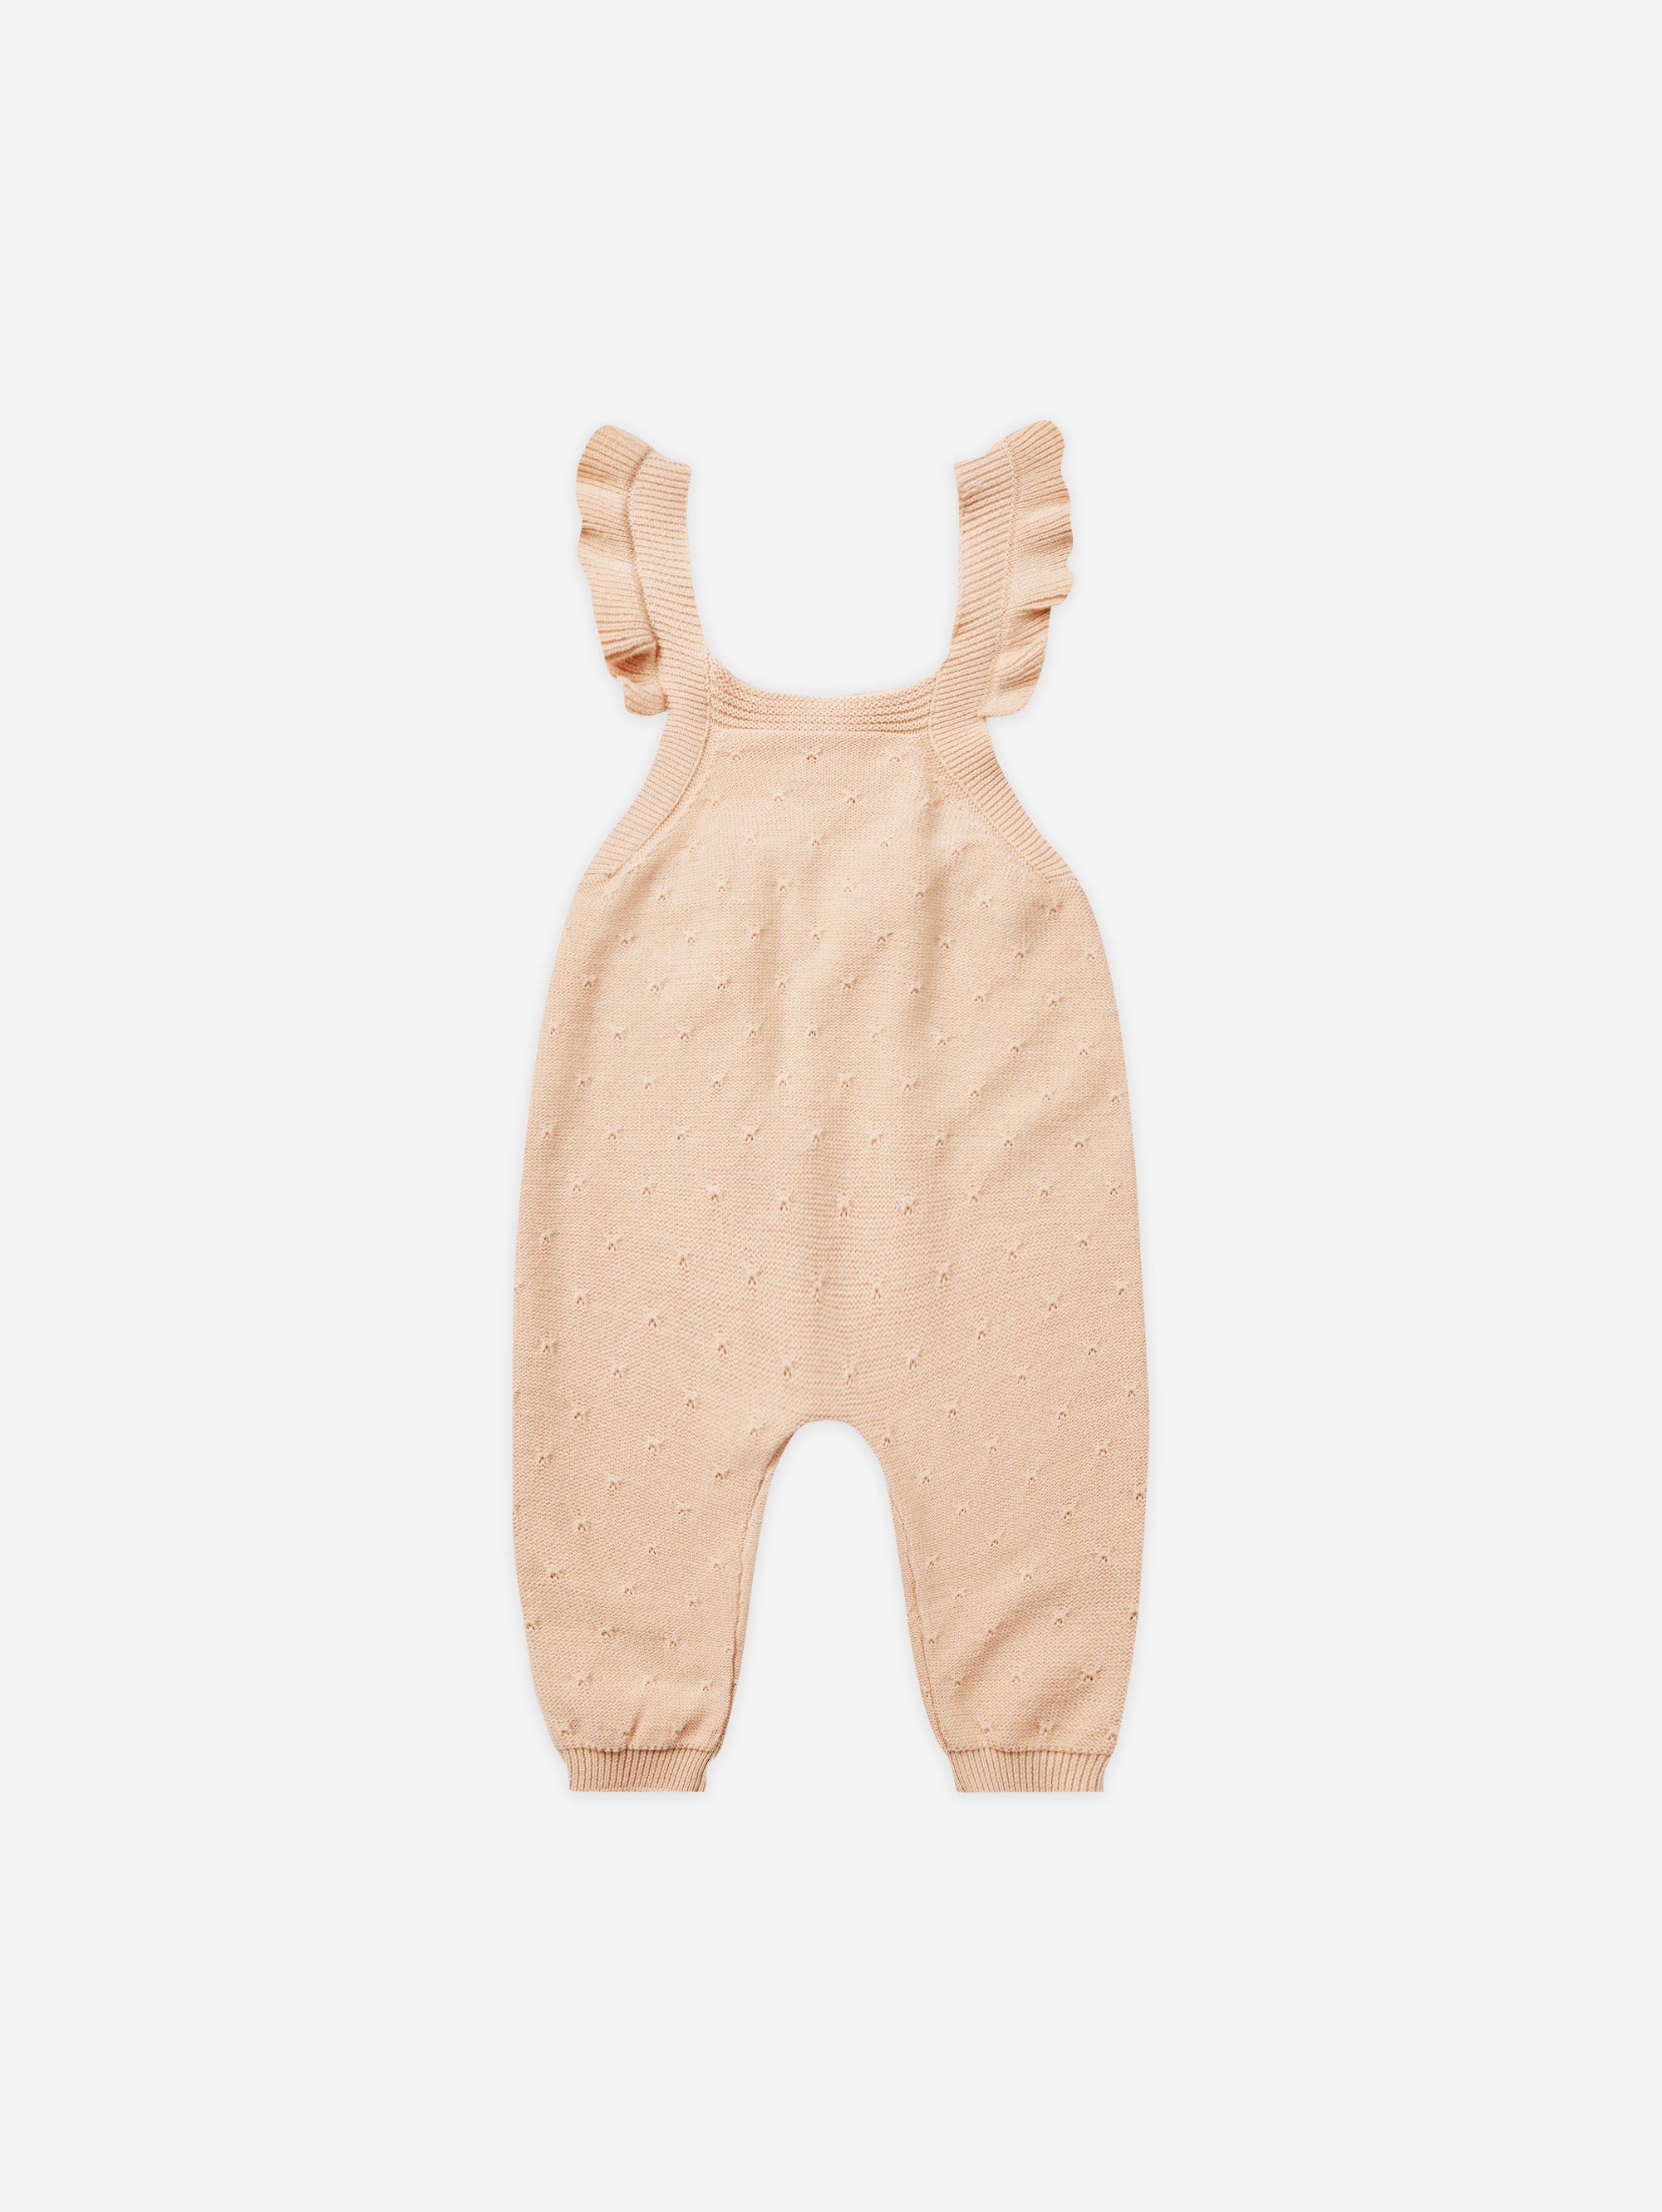 Pointelle Knit Overalls || Shell - Rylee + Cru | Kids Clothes | Trendy Baby Clothes | Modern Infant Outfits |